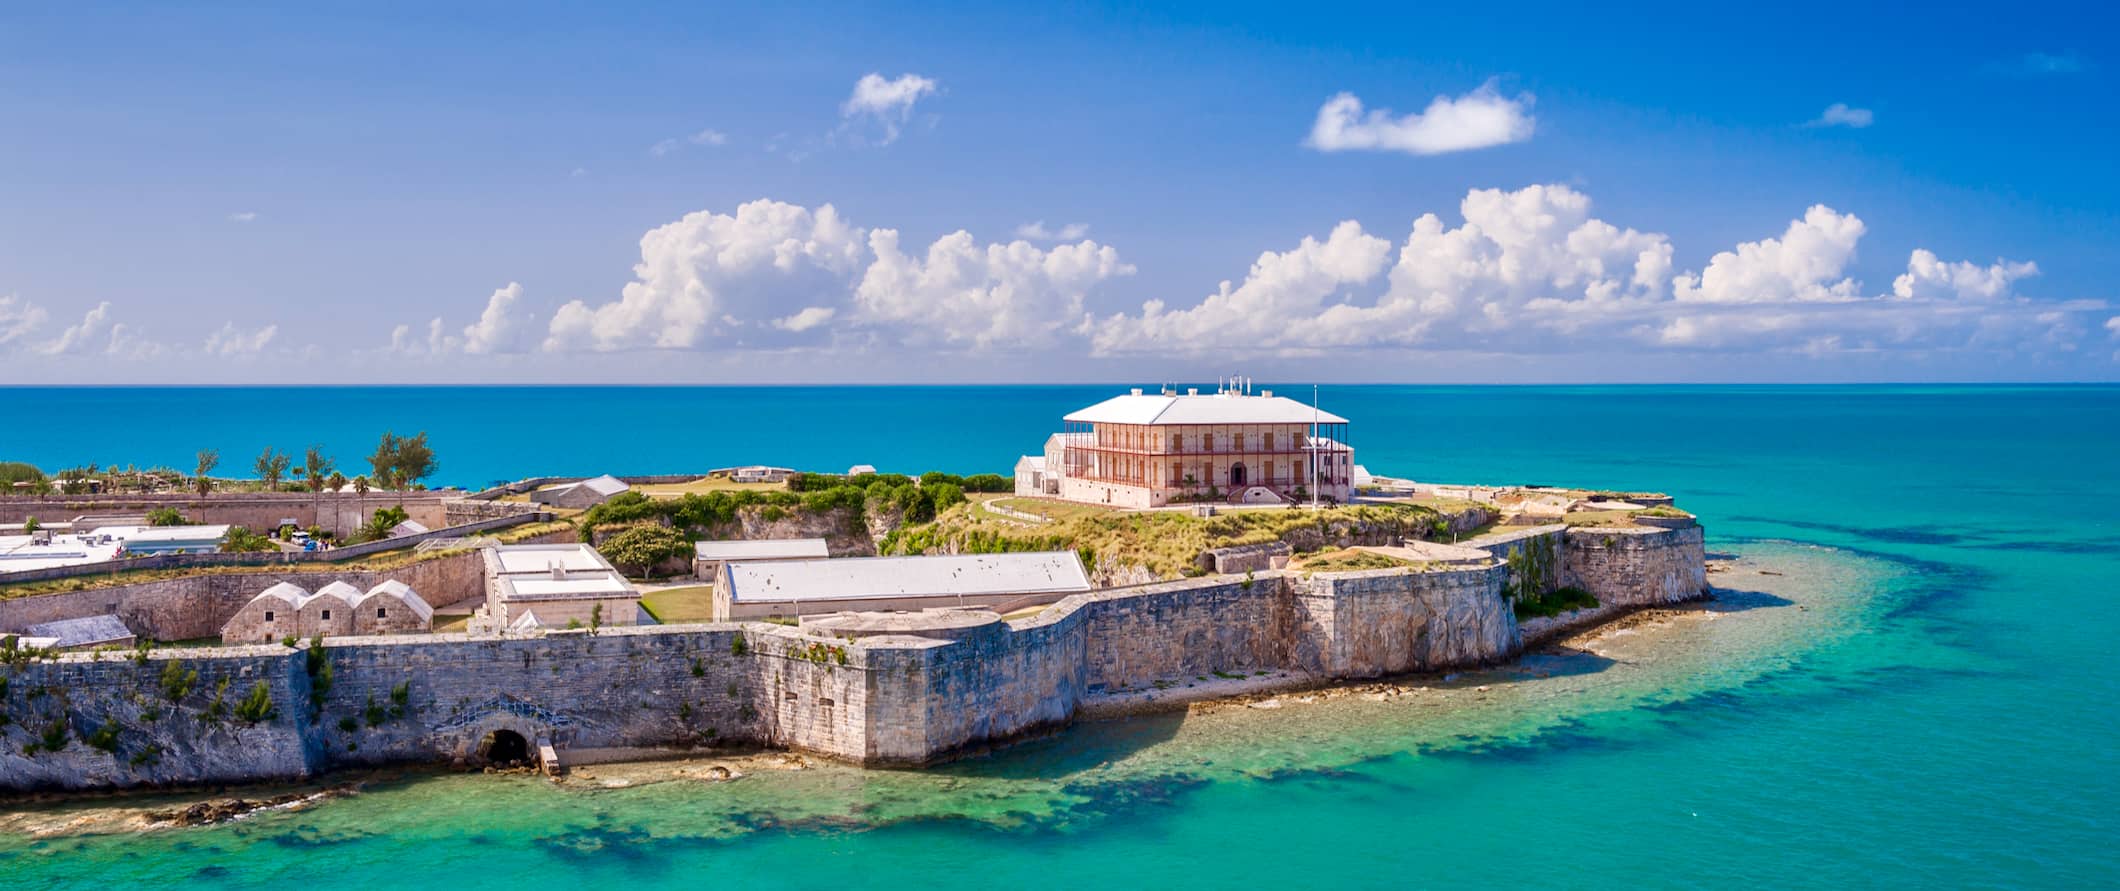 The historic Commissioner's House, surrounded by fortified walls in the Caribbean sea, on the island of Bermuda